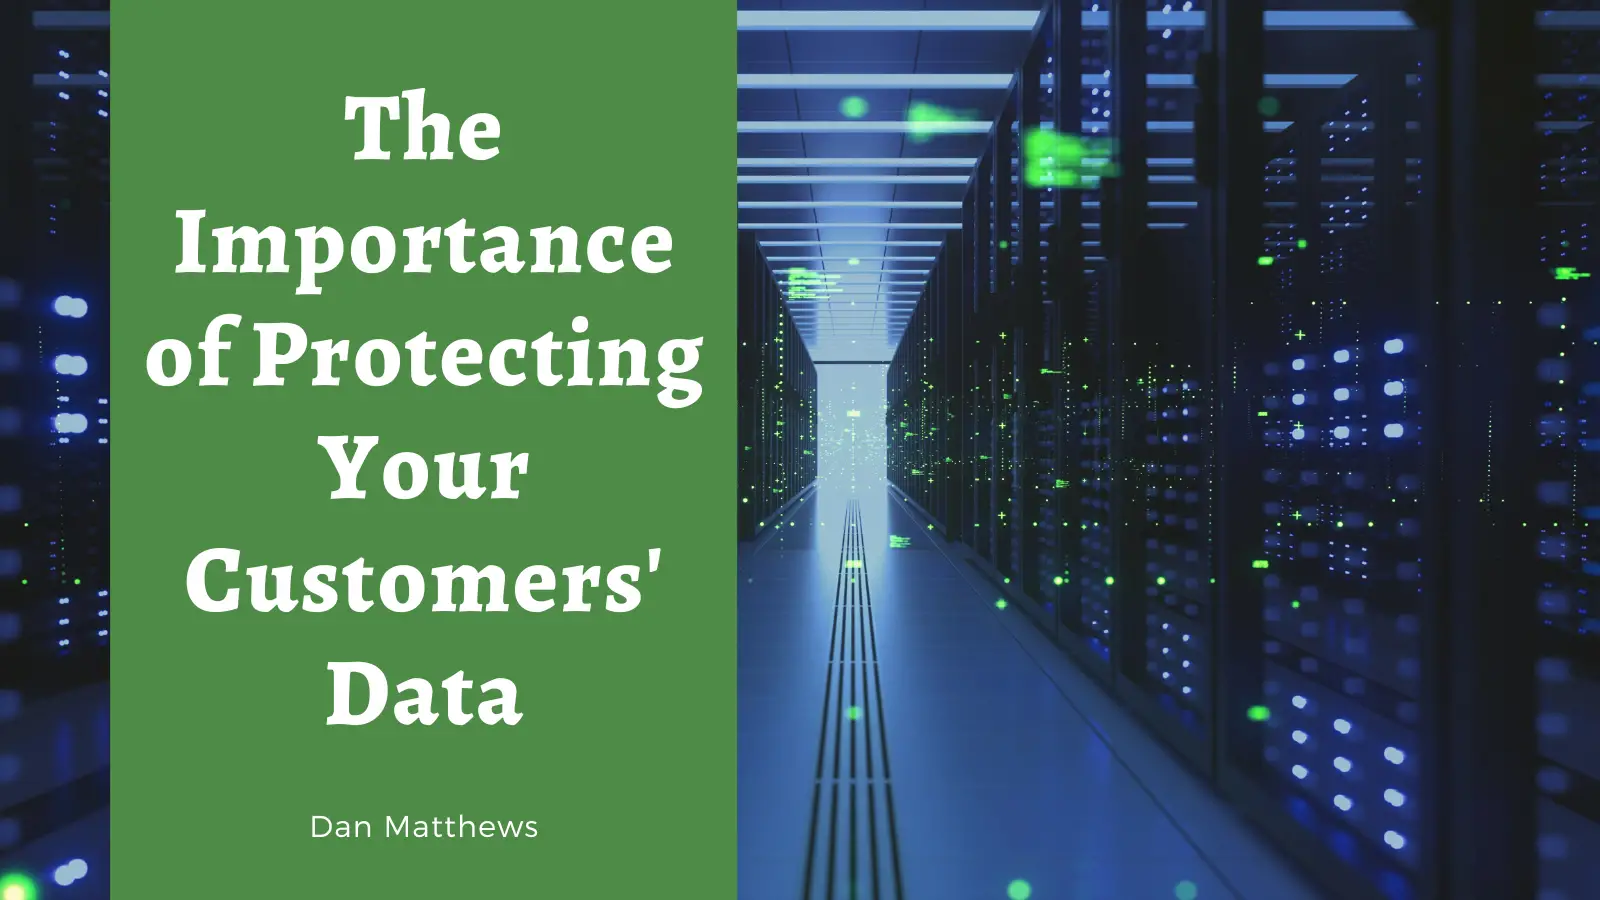 The Importance of Protecting Your Customers' Data